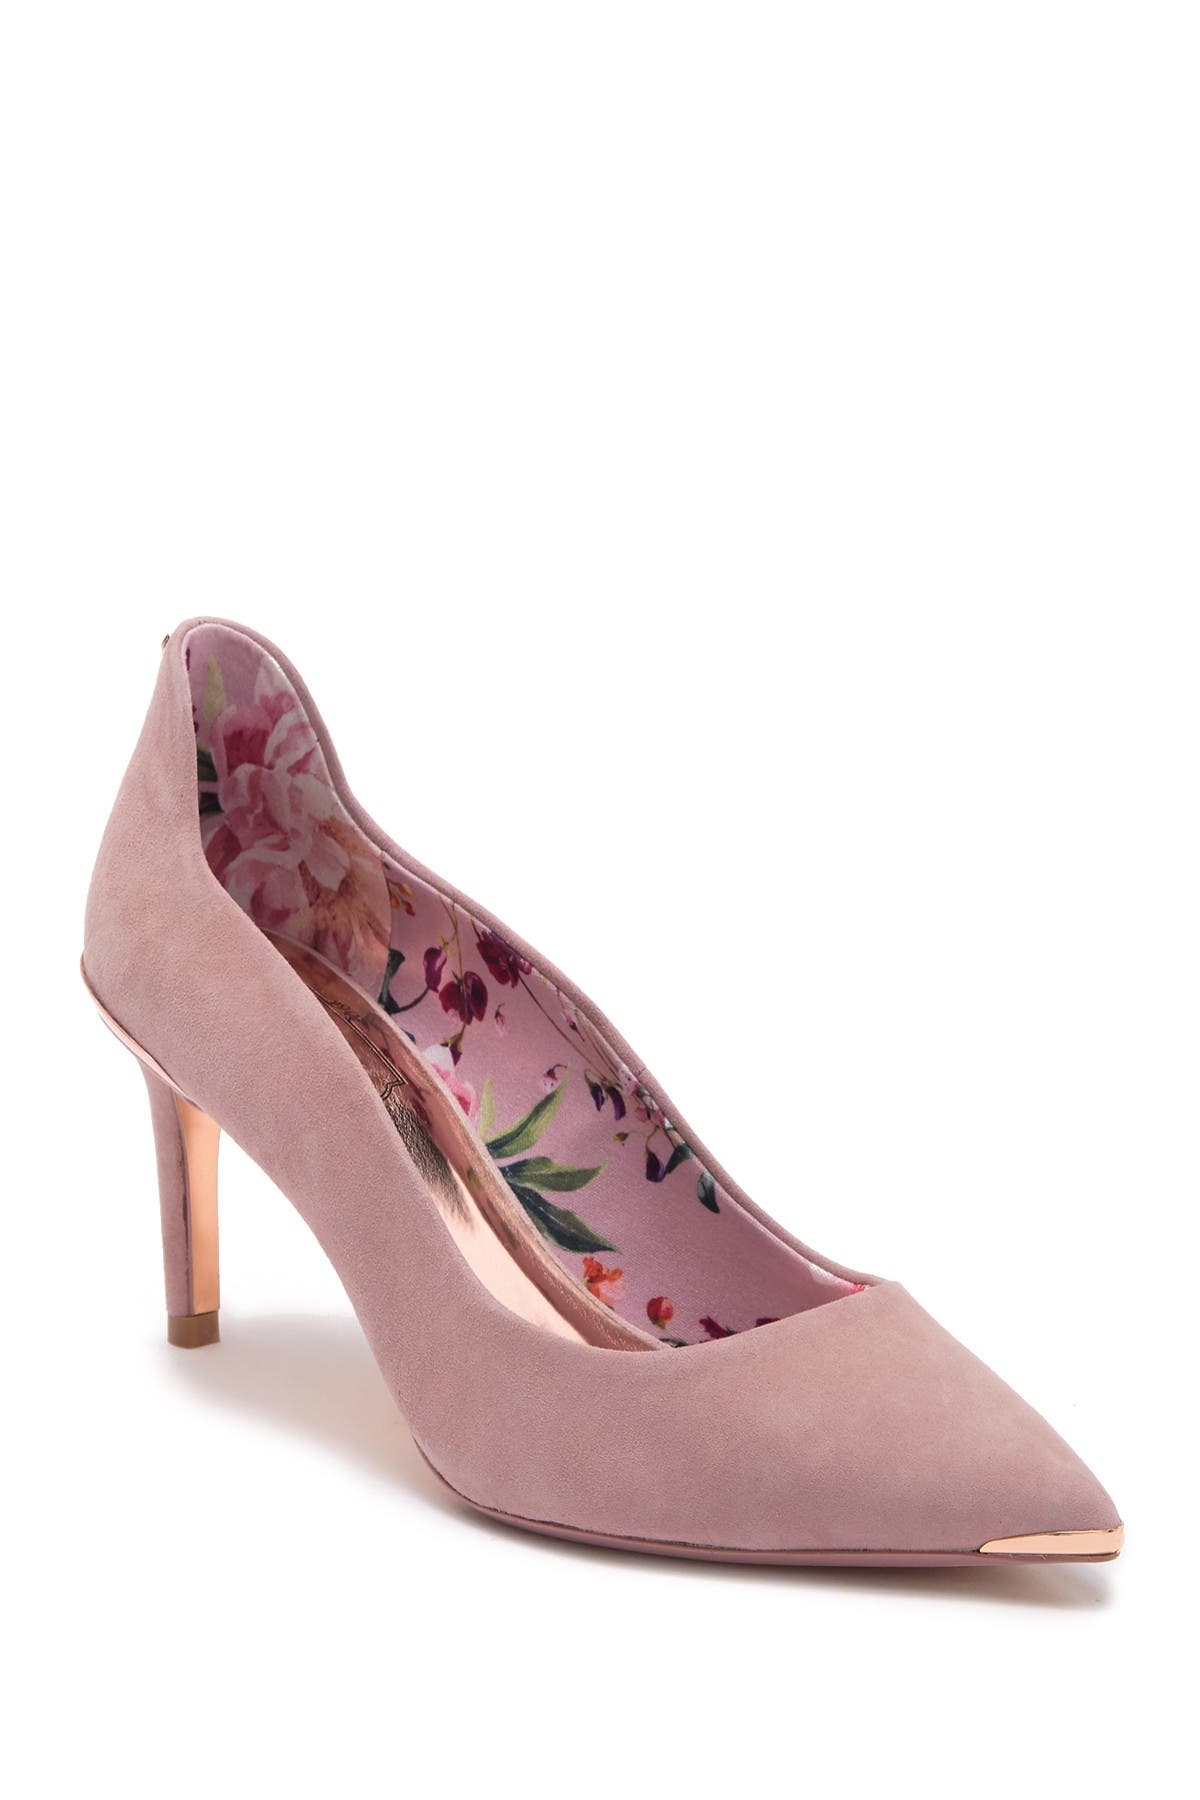 Ted Baker London | Vixyn Suede Pointed 